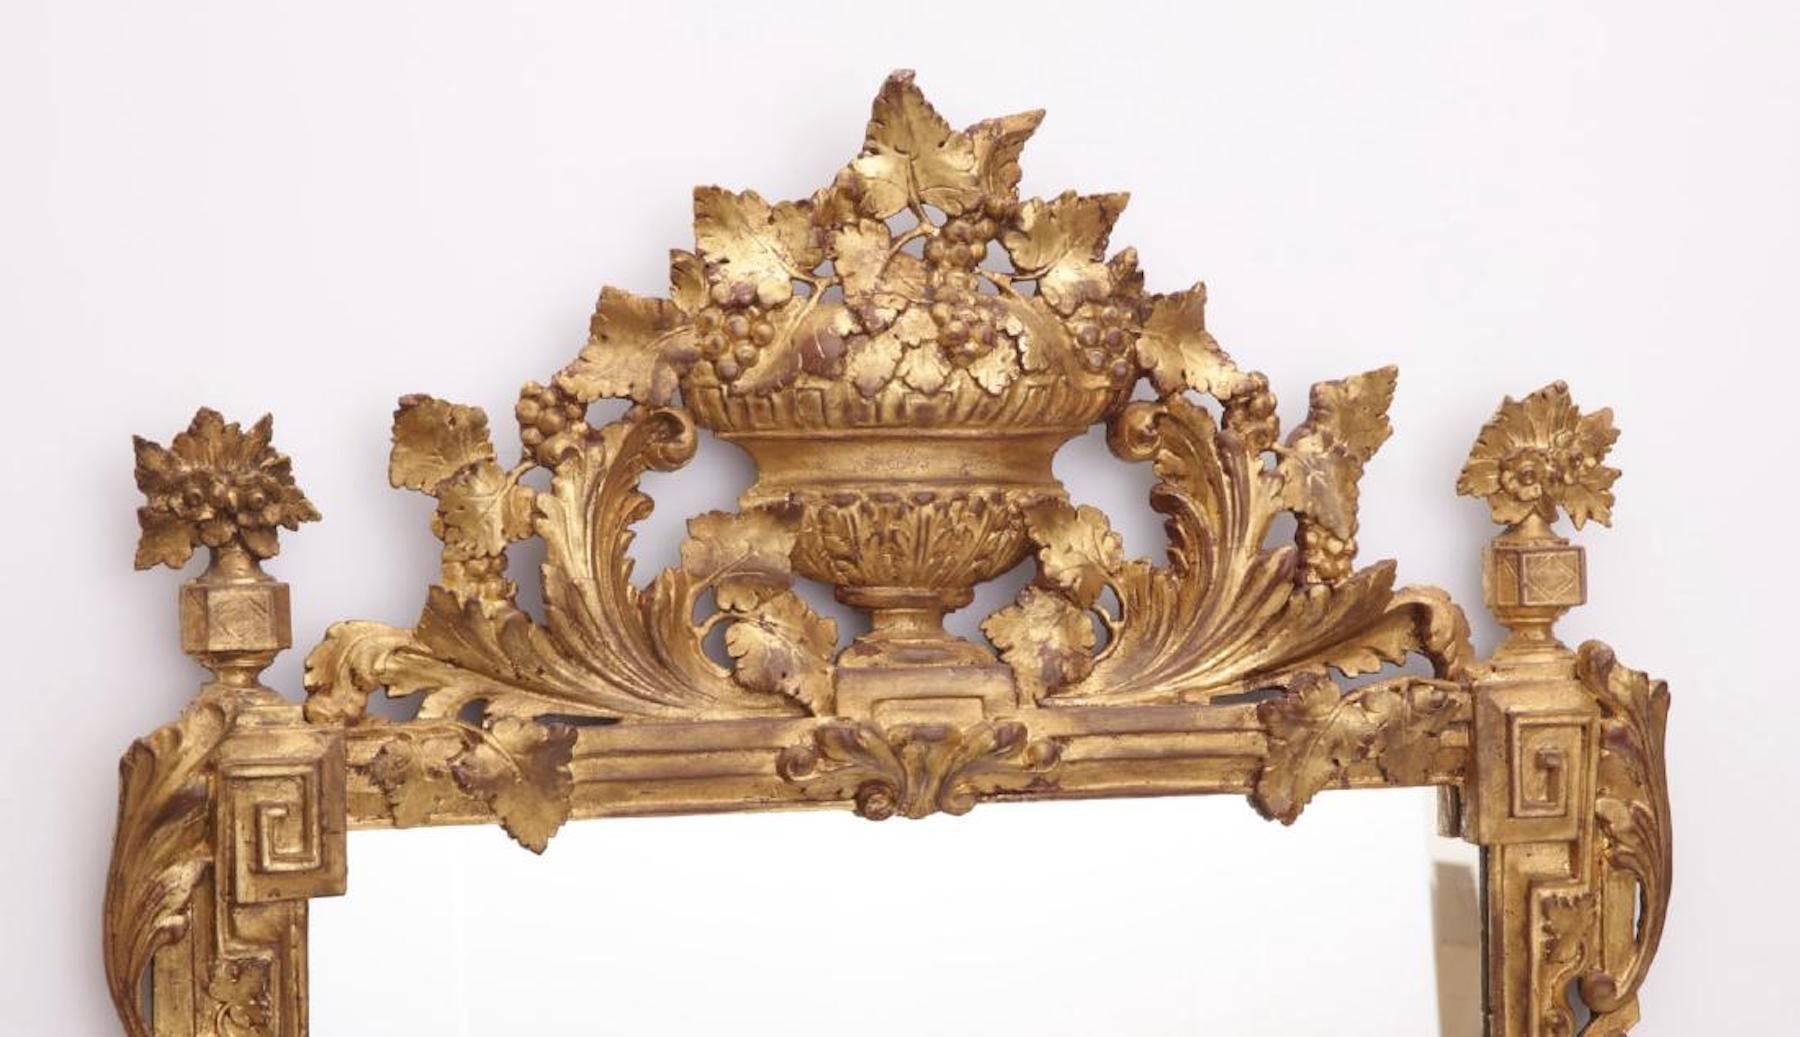 Antique Continental giltwood neoclassic mirror, beautifully carved floret frame with trellis 
Presently this item is located in at our NJ warehouse.